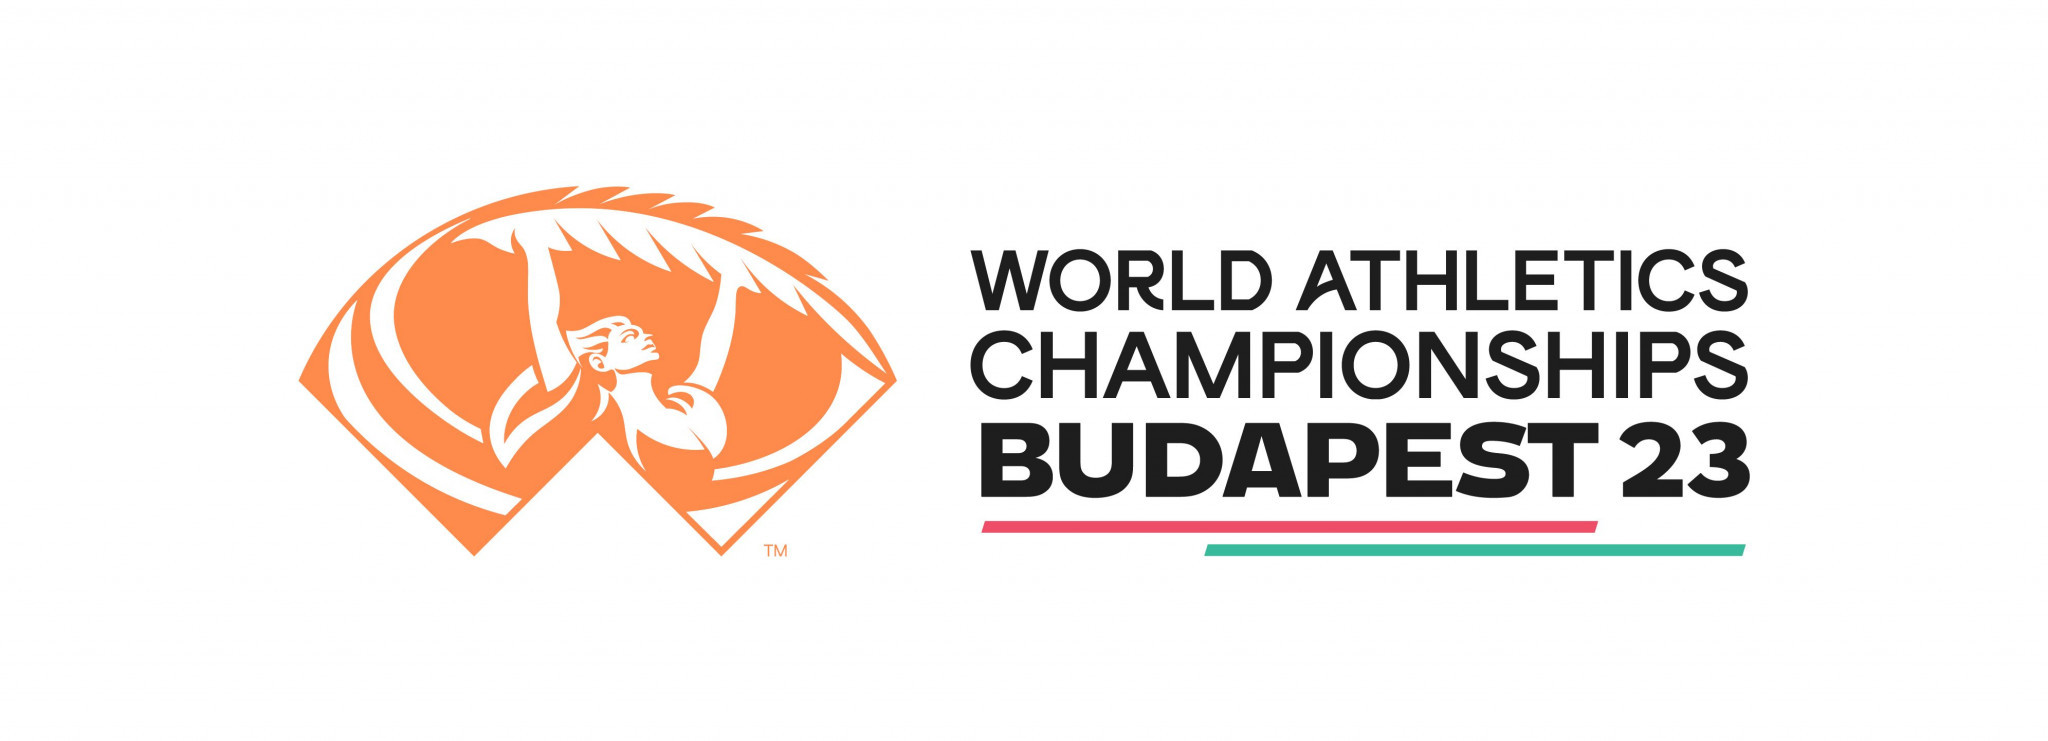 The logo for the World Athletics Championships in Budapest has been unveiled ©World Athletics Championships Budapest 23